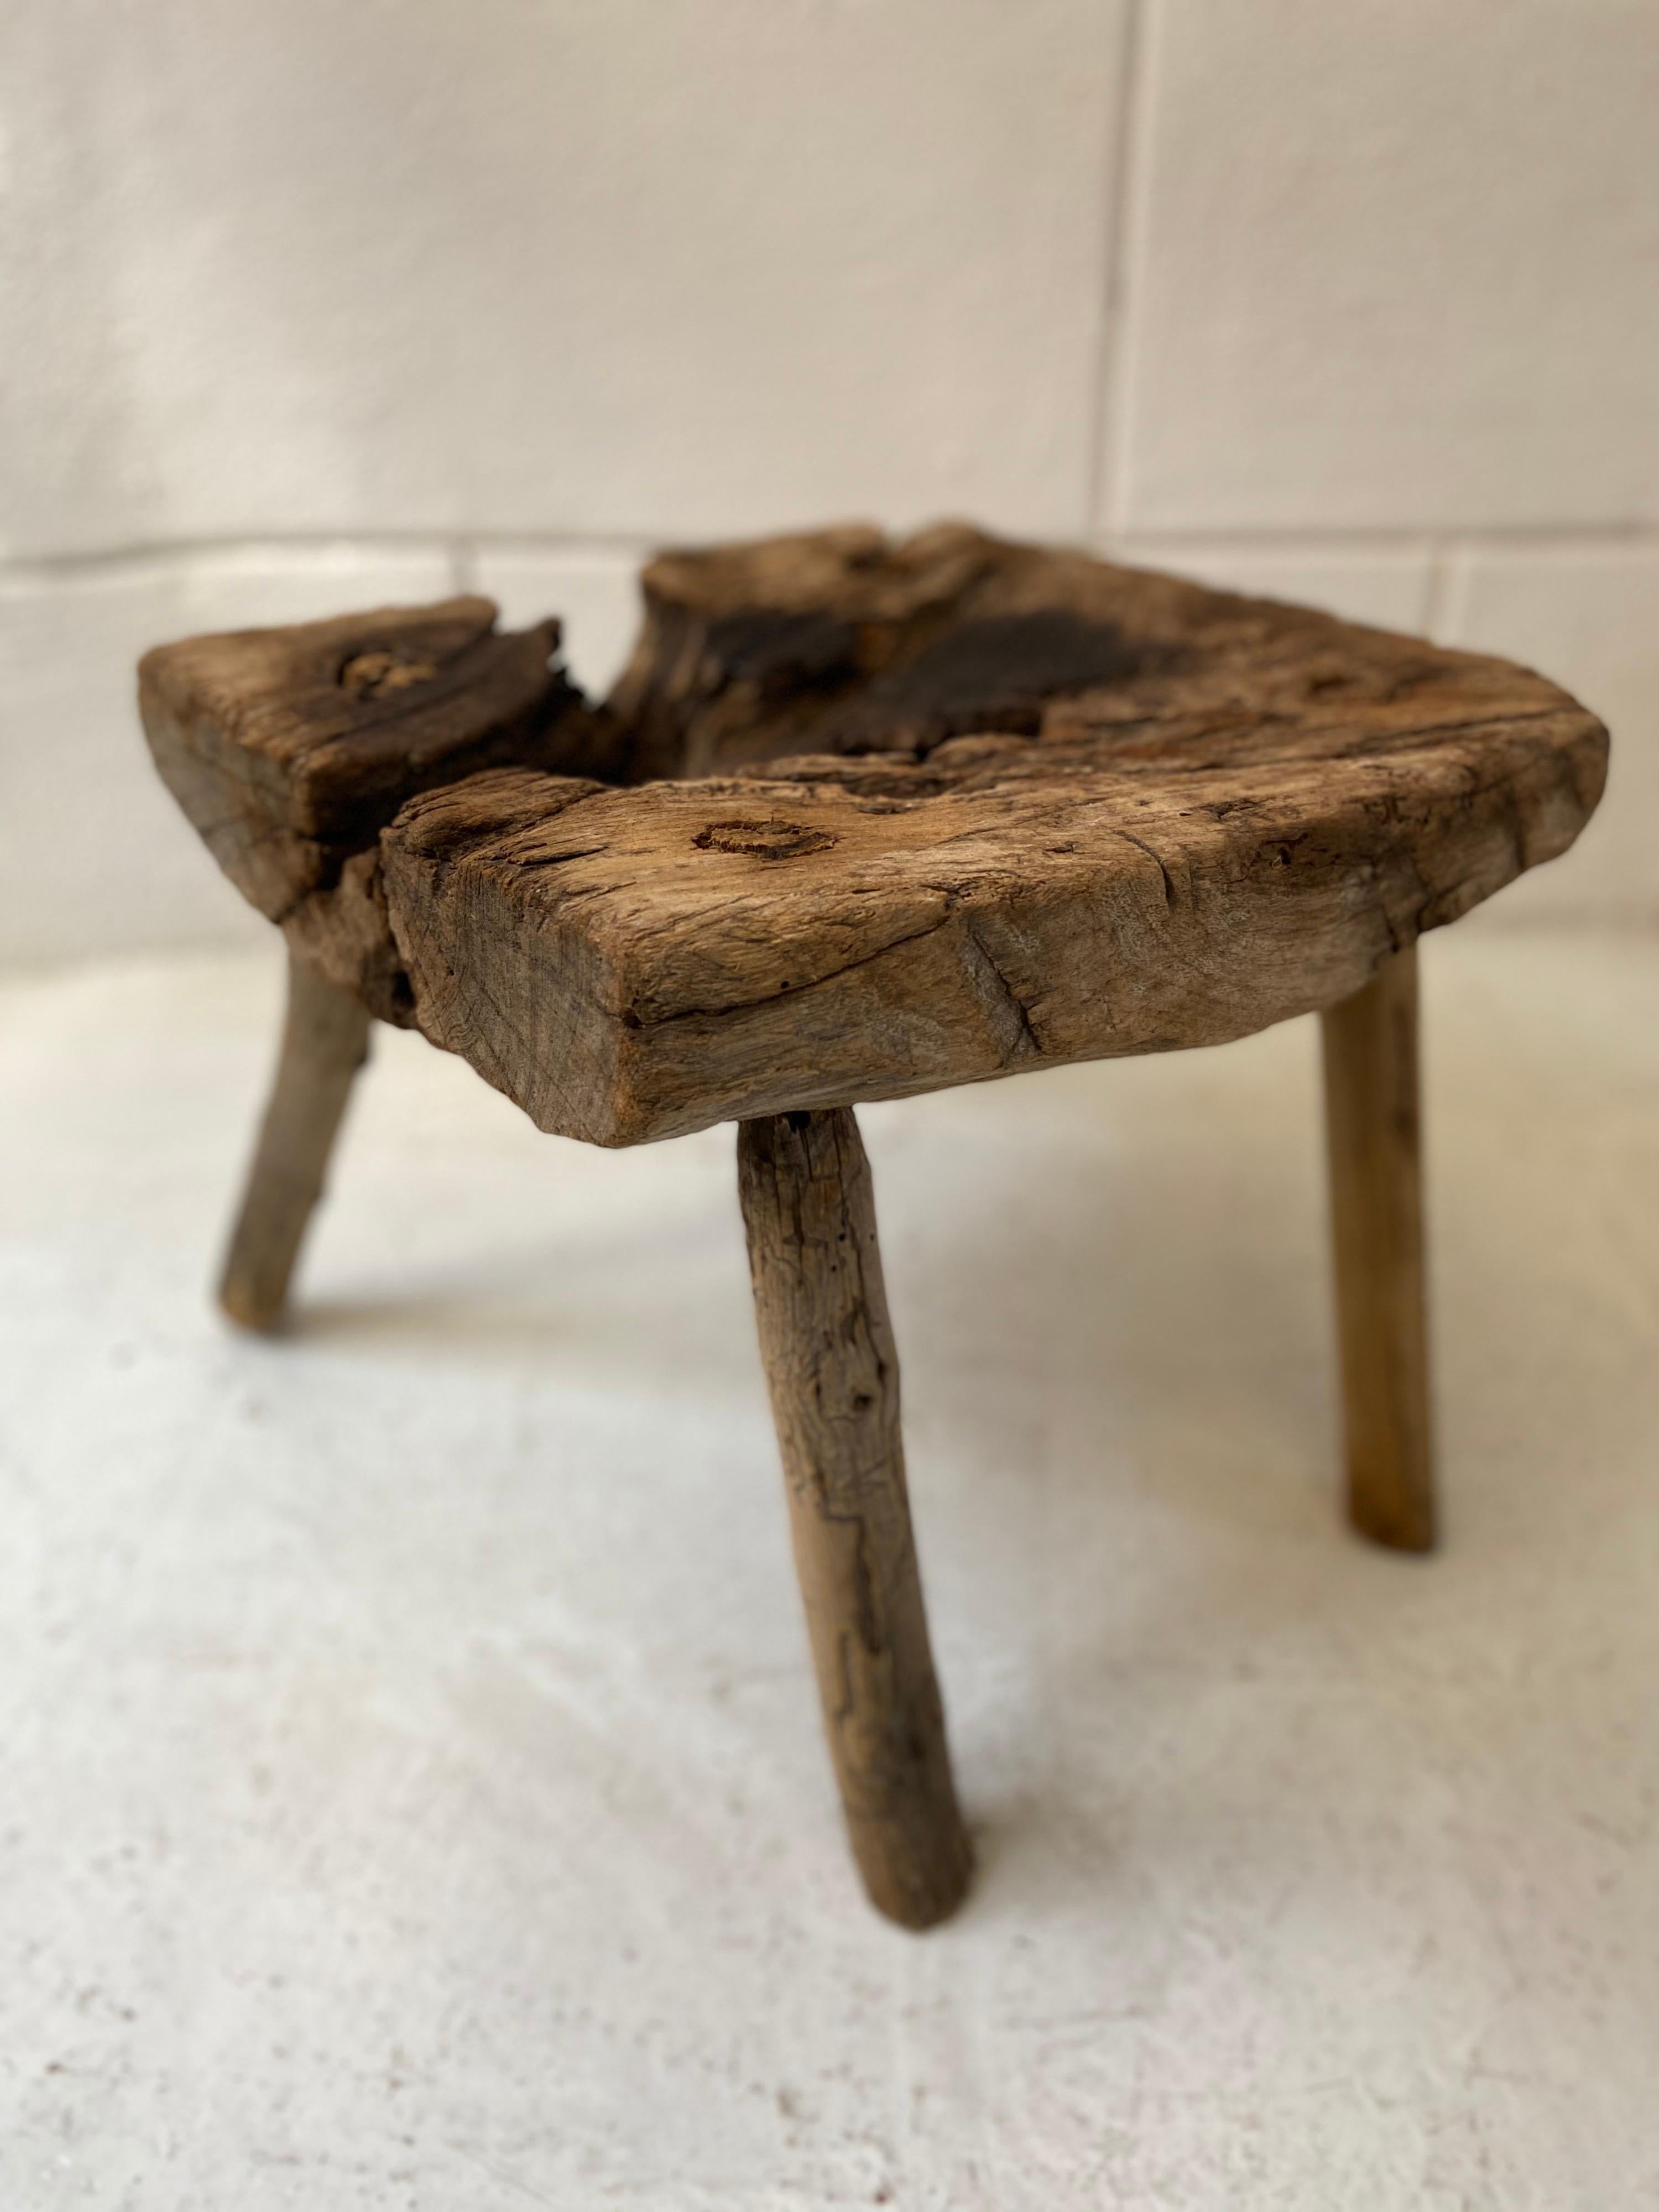 Hand-Crafted Mesquite Stool from Mexico, circa 1950s